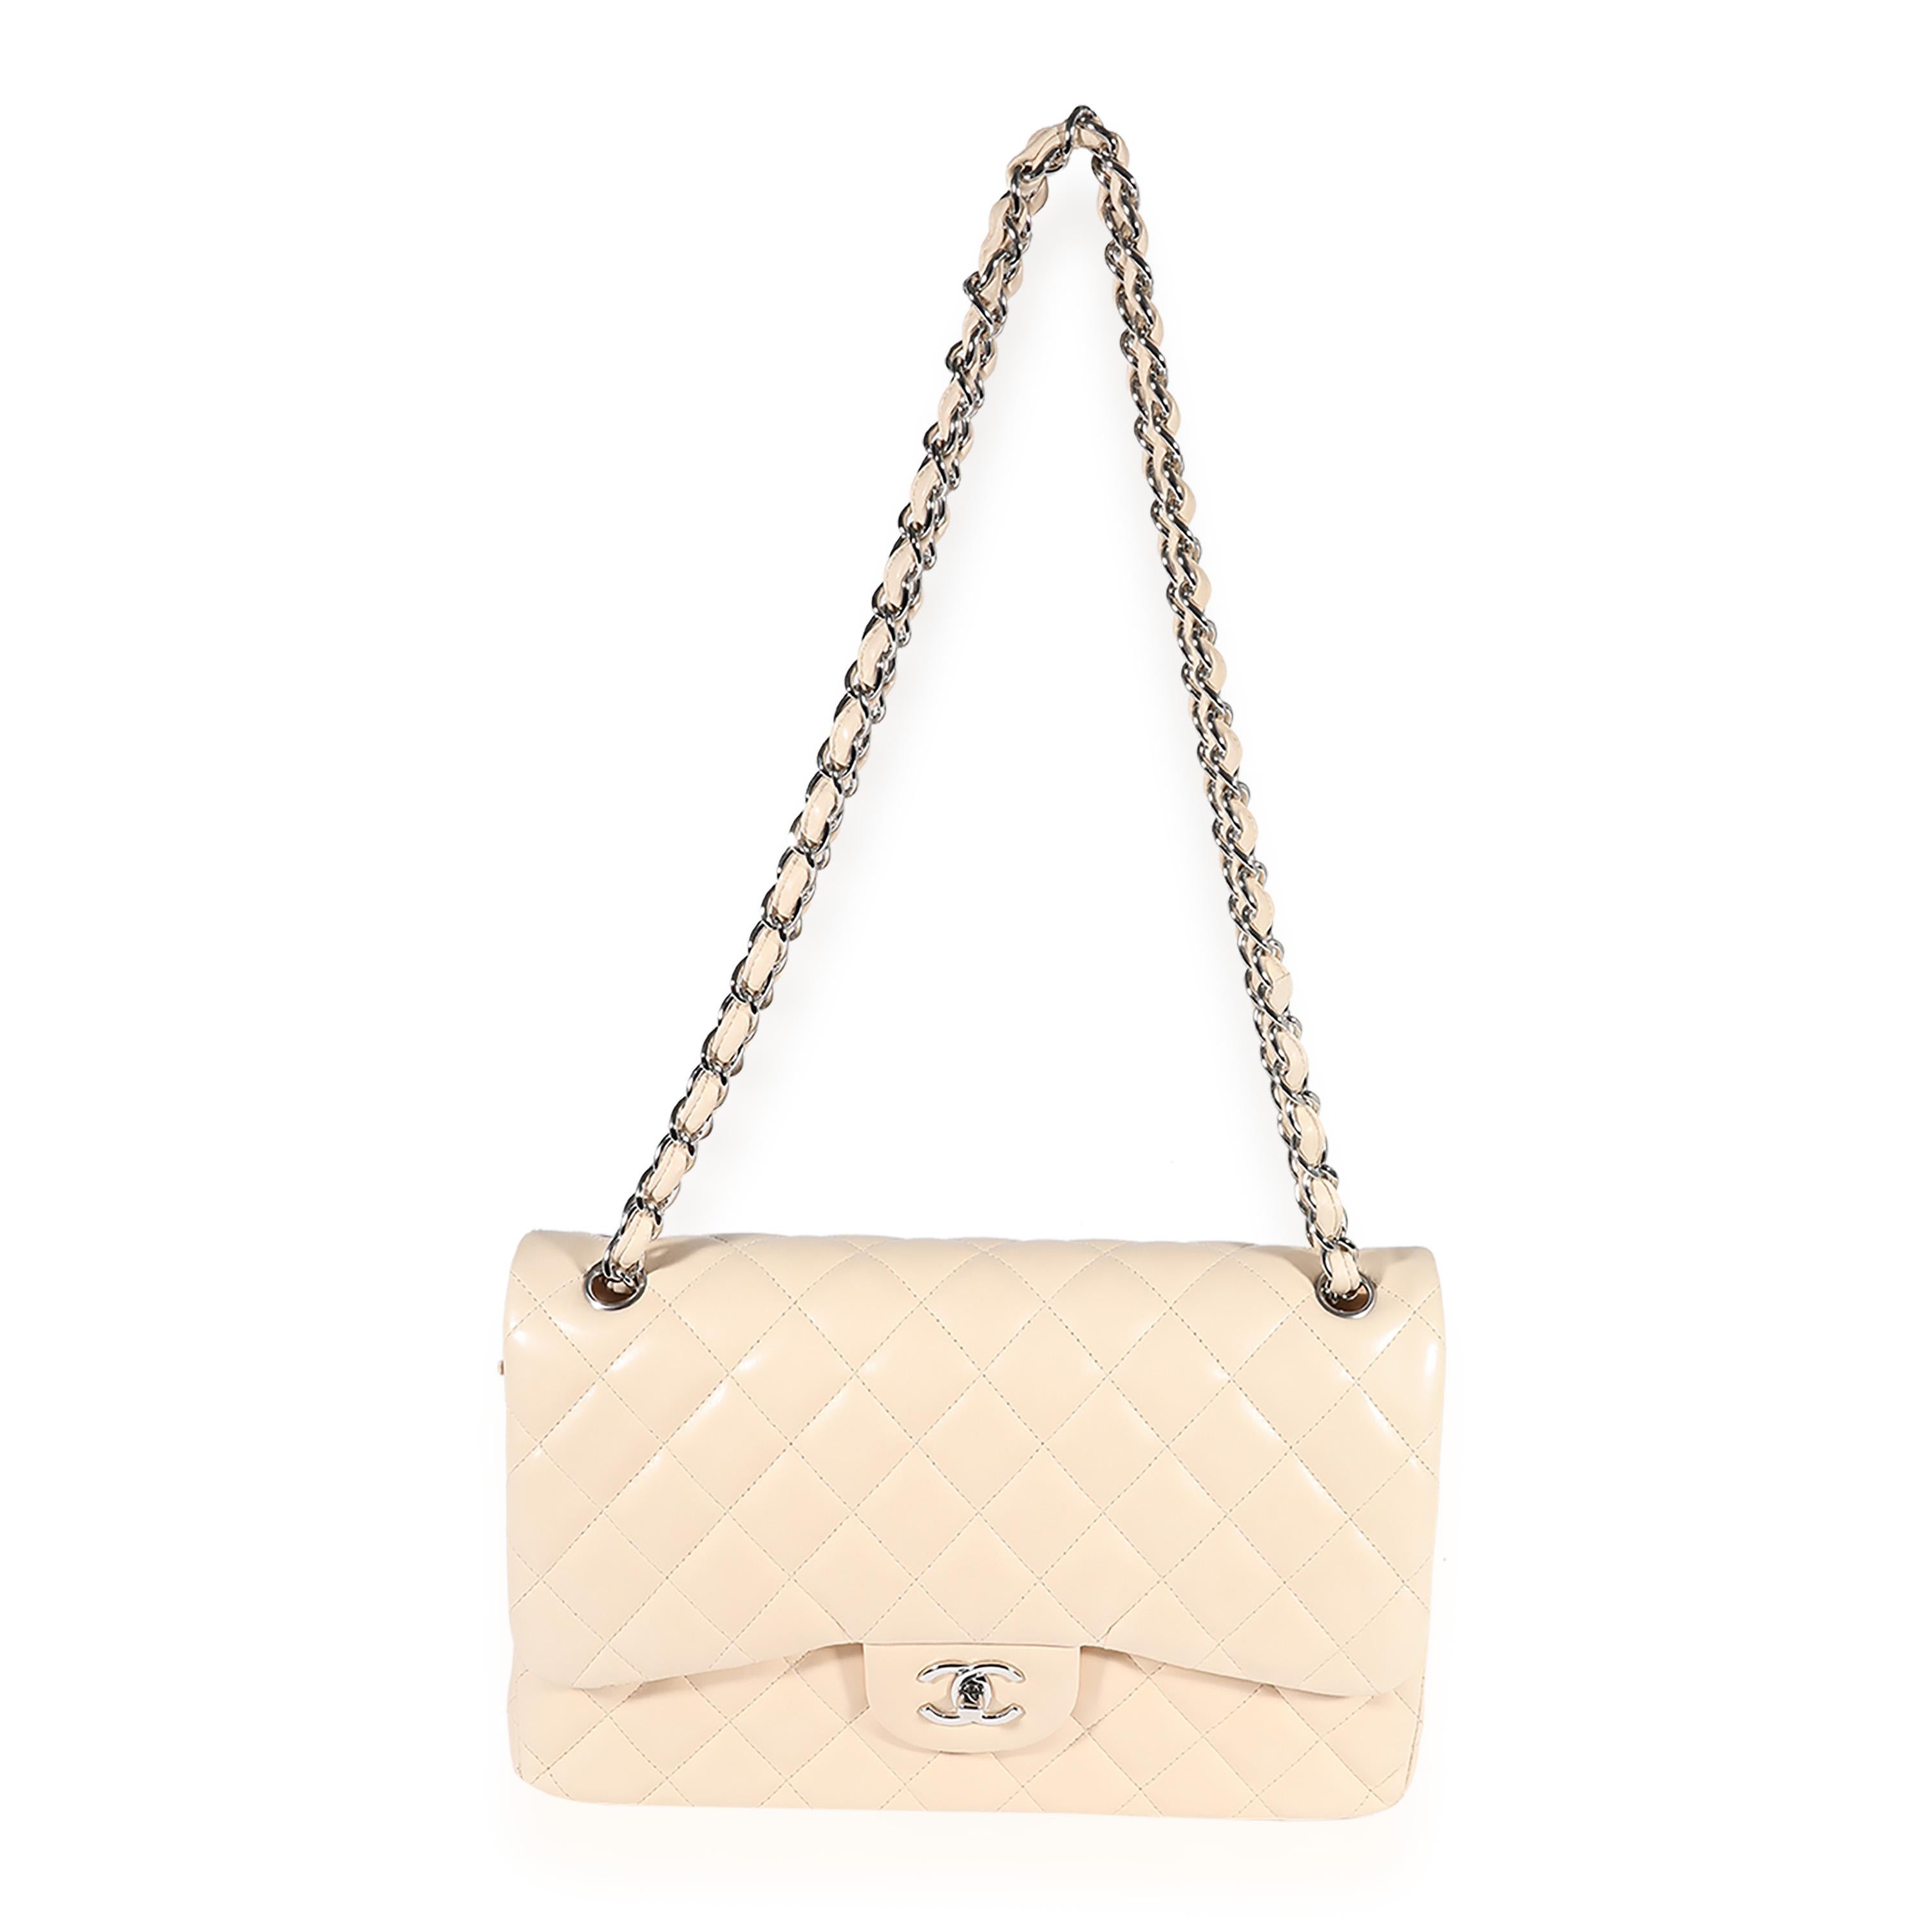 Listing Title: Chanel Beige Quilted Lambskin Jumbo Classic Double Flap Bag
SKU: 123157
MSRP: 9500.00
Condition: Pre-owned 
Handbag Condition: Very Good
Condition Comments: Very Good Condition. Light discoloration throughout leather. Scuffing and